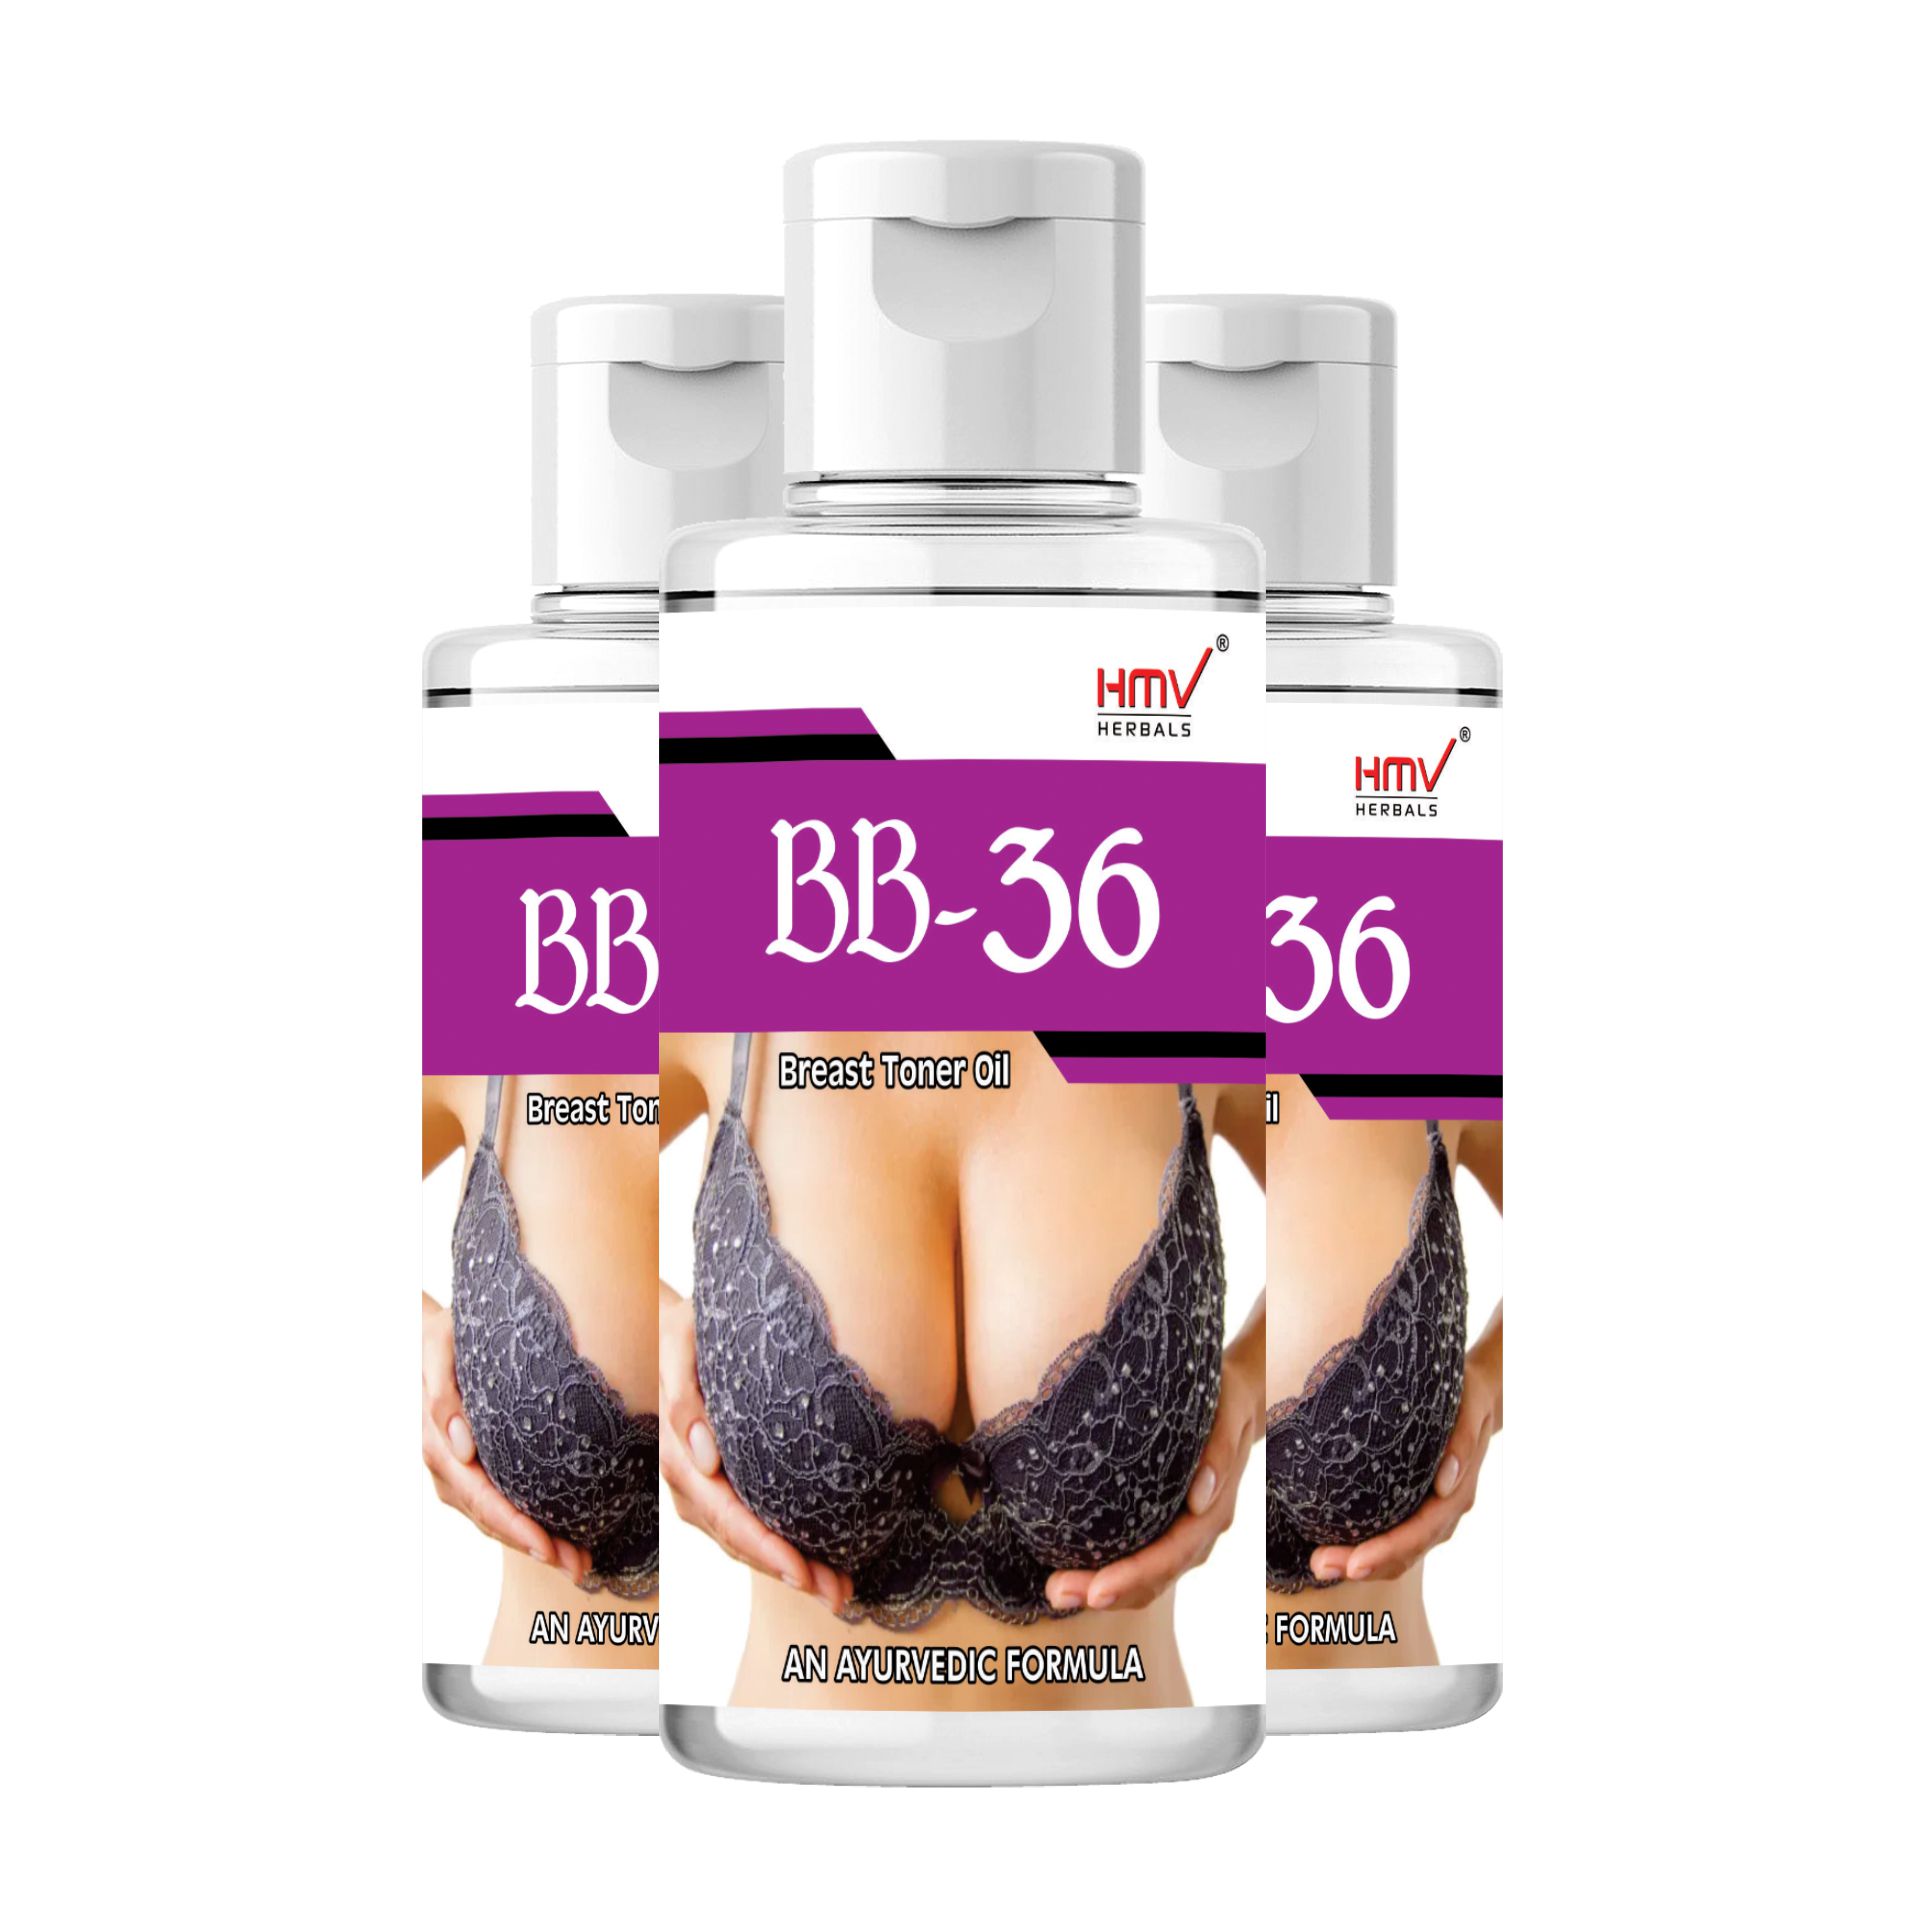 Herbals BB-36 Bust Firming Oil for Women. pack of 3